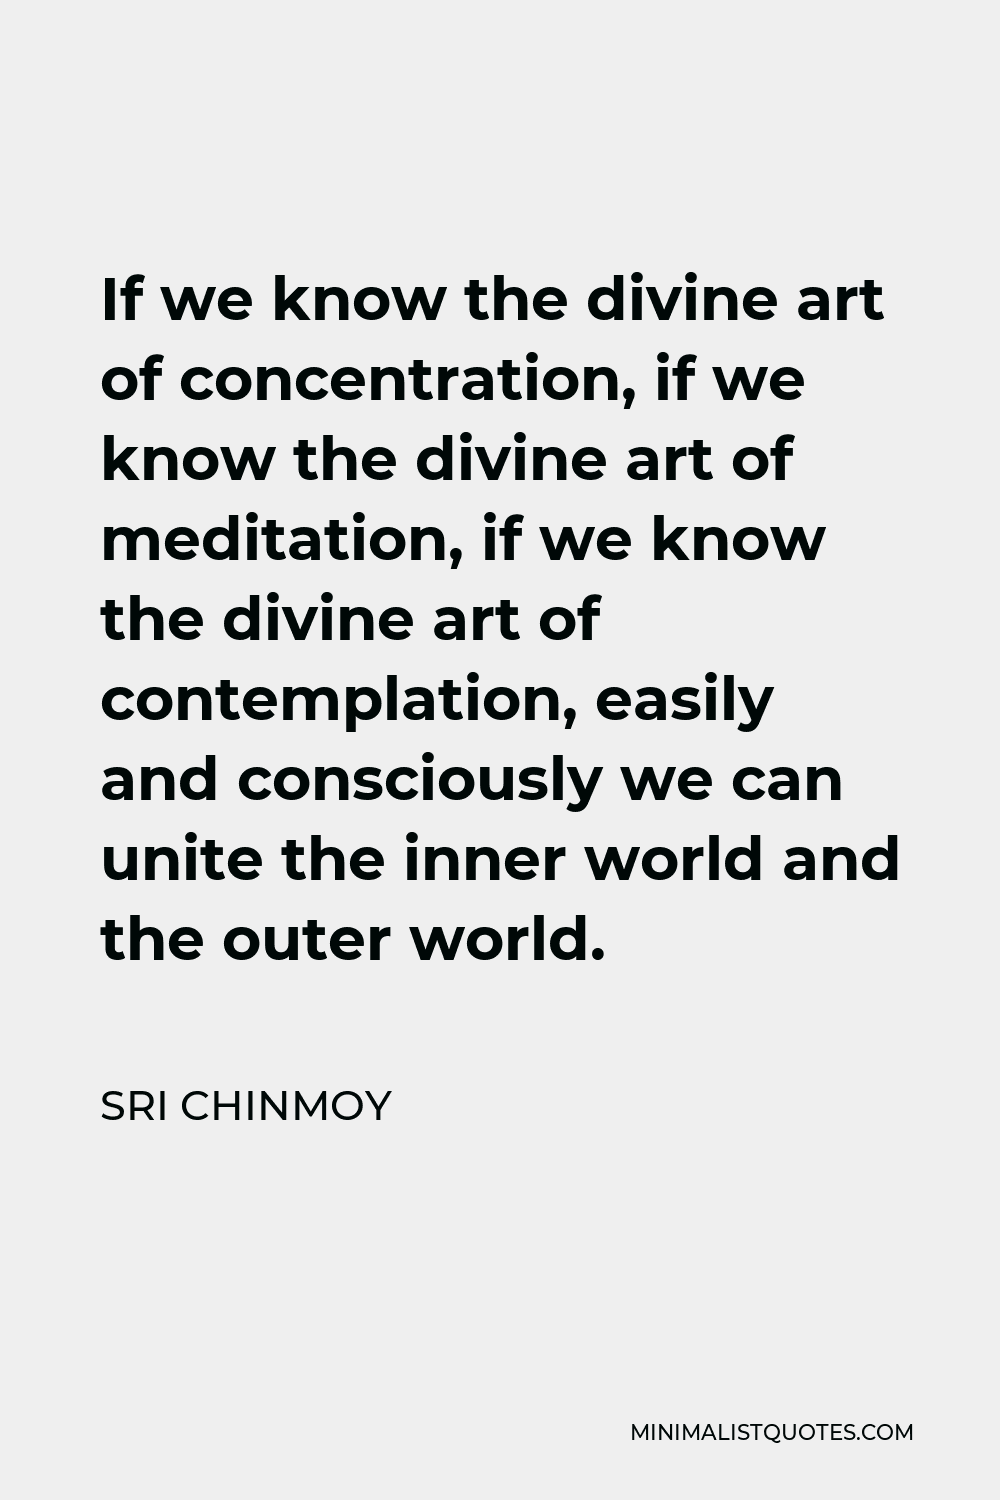 Sri Chinmoy Quote - If we know the divine art of concentration, if we know the divine art of meditation, if we know the divine art of contemplation, easily and consciously we can unite the inner world and the outer world.